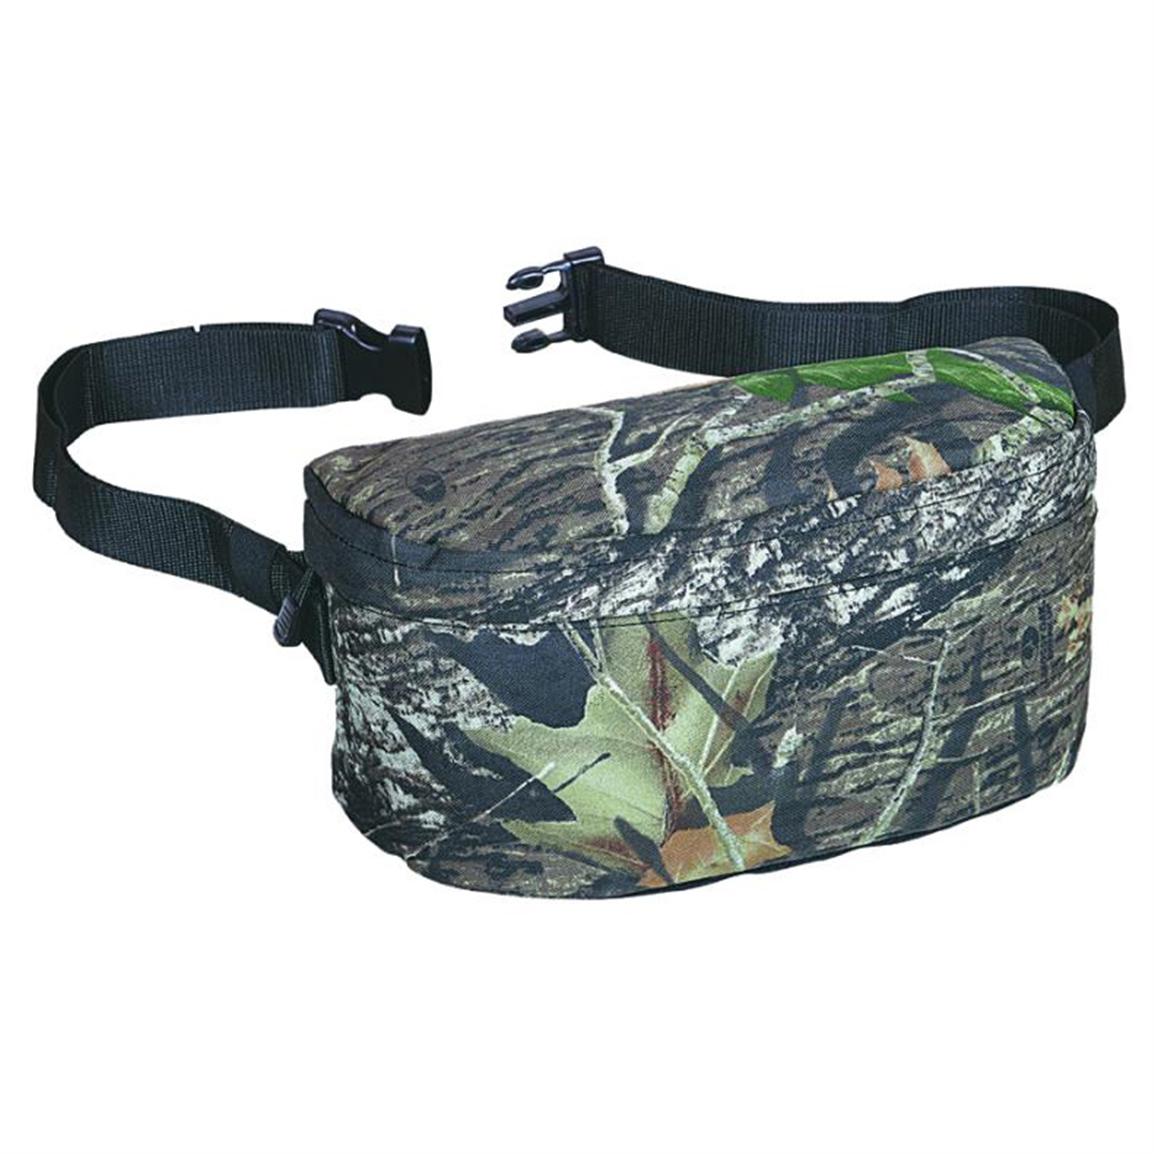 Best Hunting Fanny Pack 2021 Reviews & Buyers Guide | IUCN Water